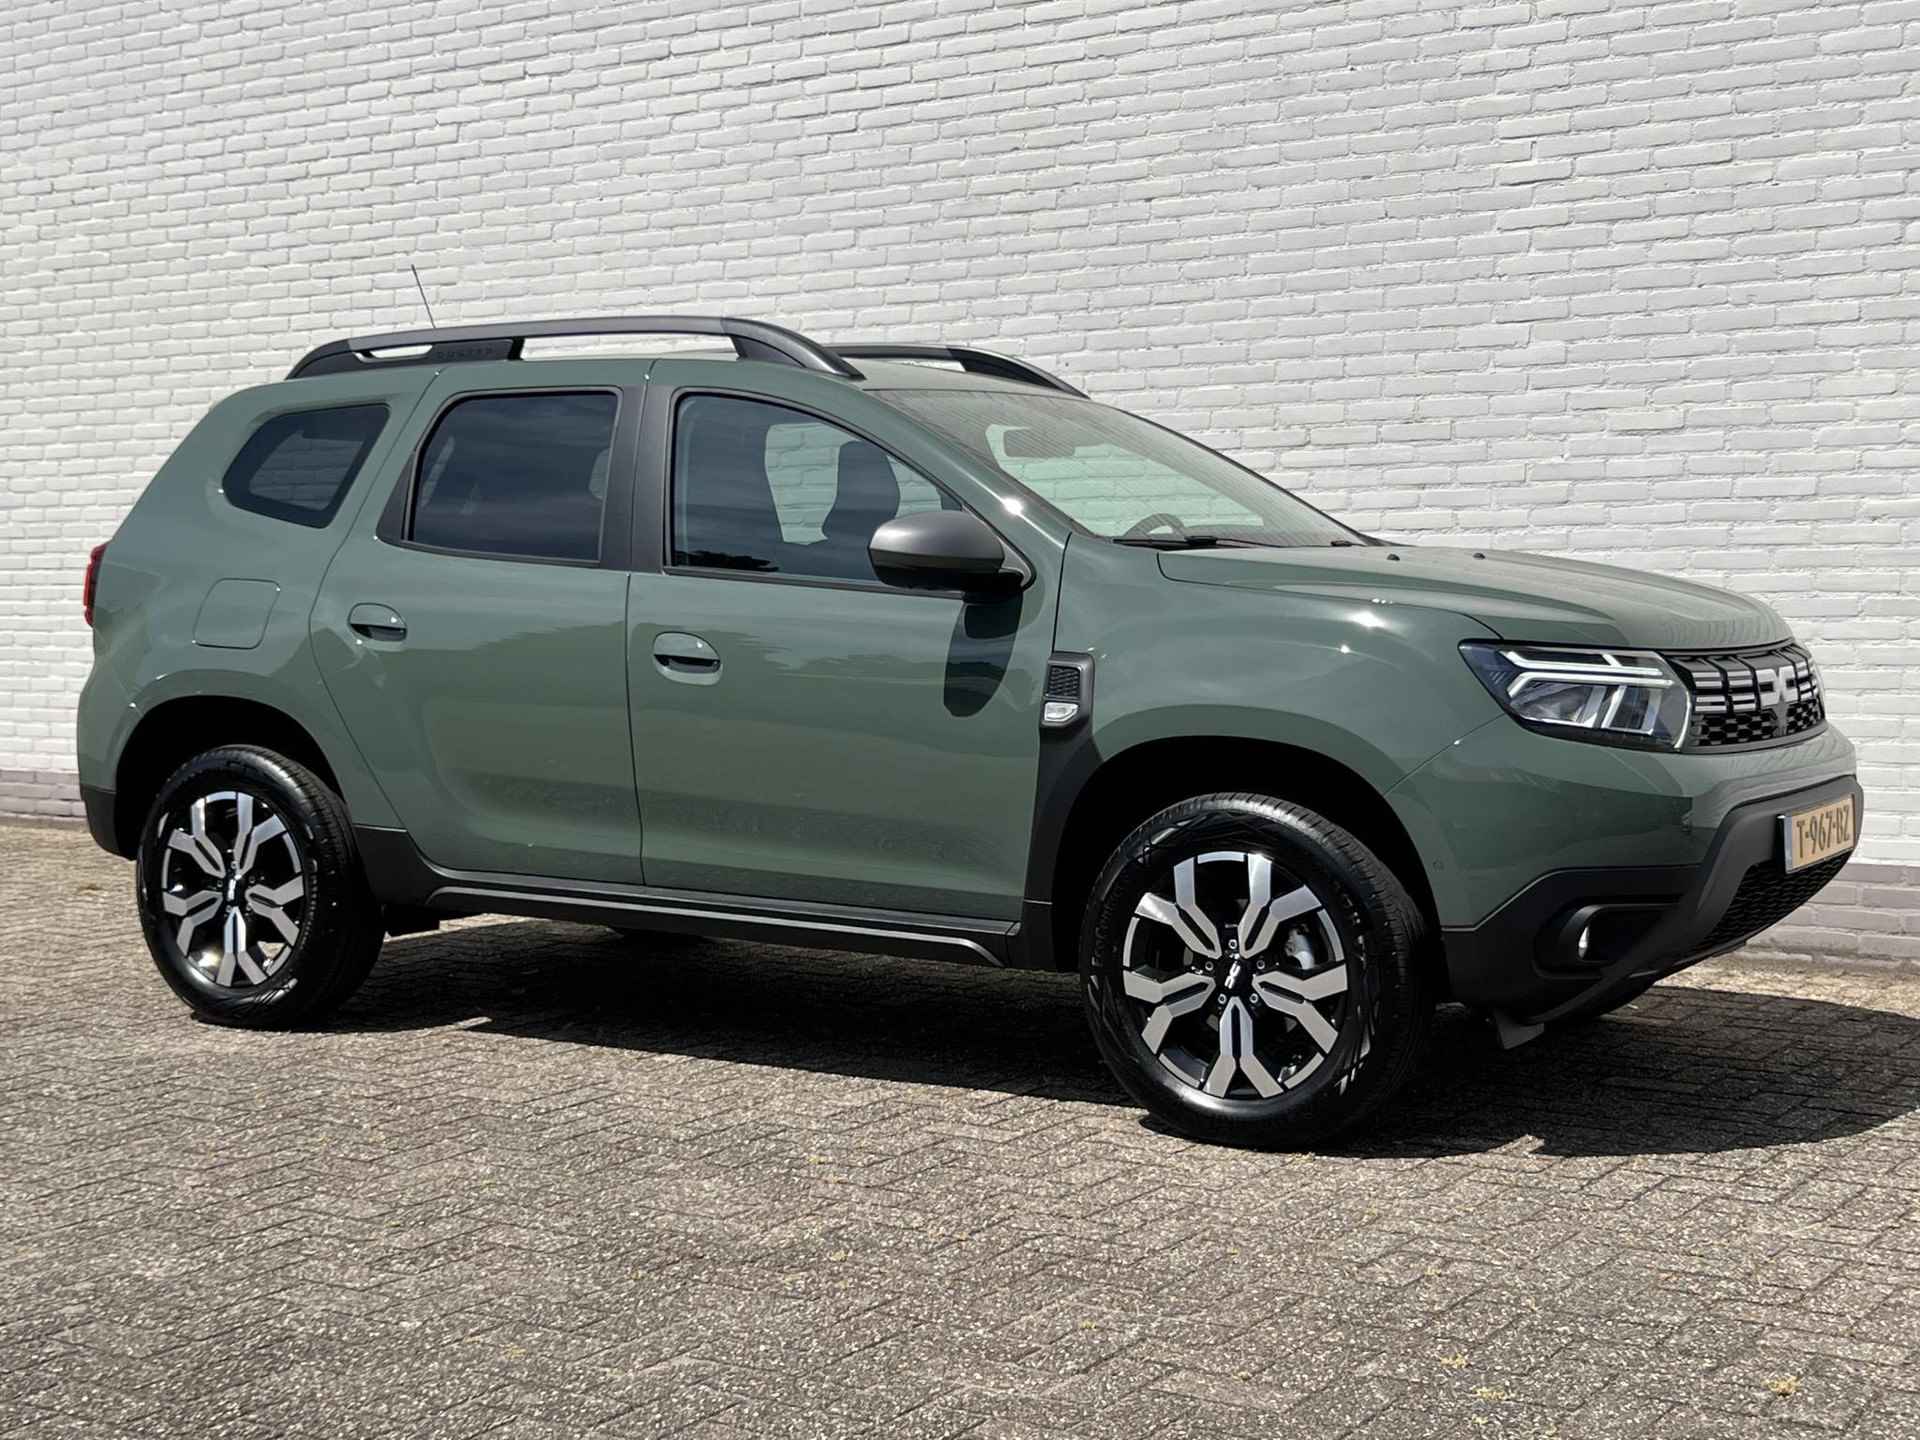 Dacia Duster 1.3 TCe 130 Journey / 360 Camera / Parkeersensoren voor + Achter / Apple Carplay & Android Auto / Navi / Cruise / Clima / DAB / LED / Keyless / - 35/38